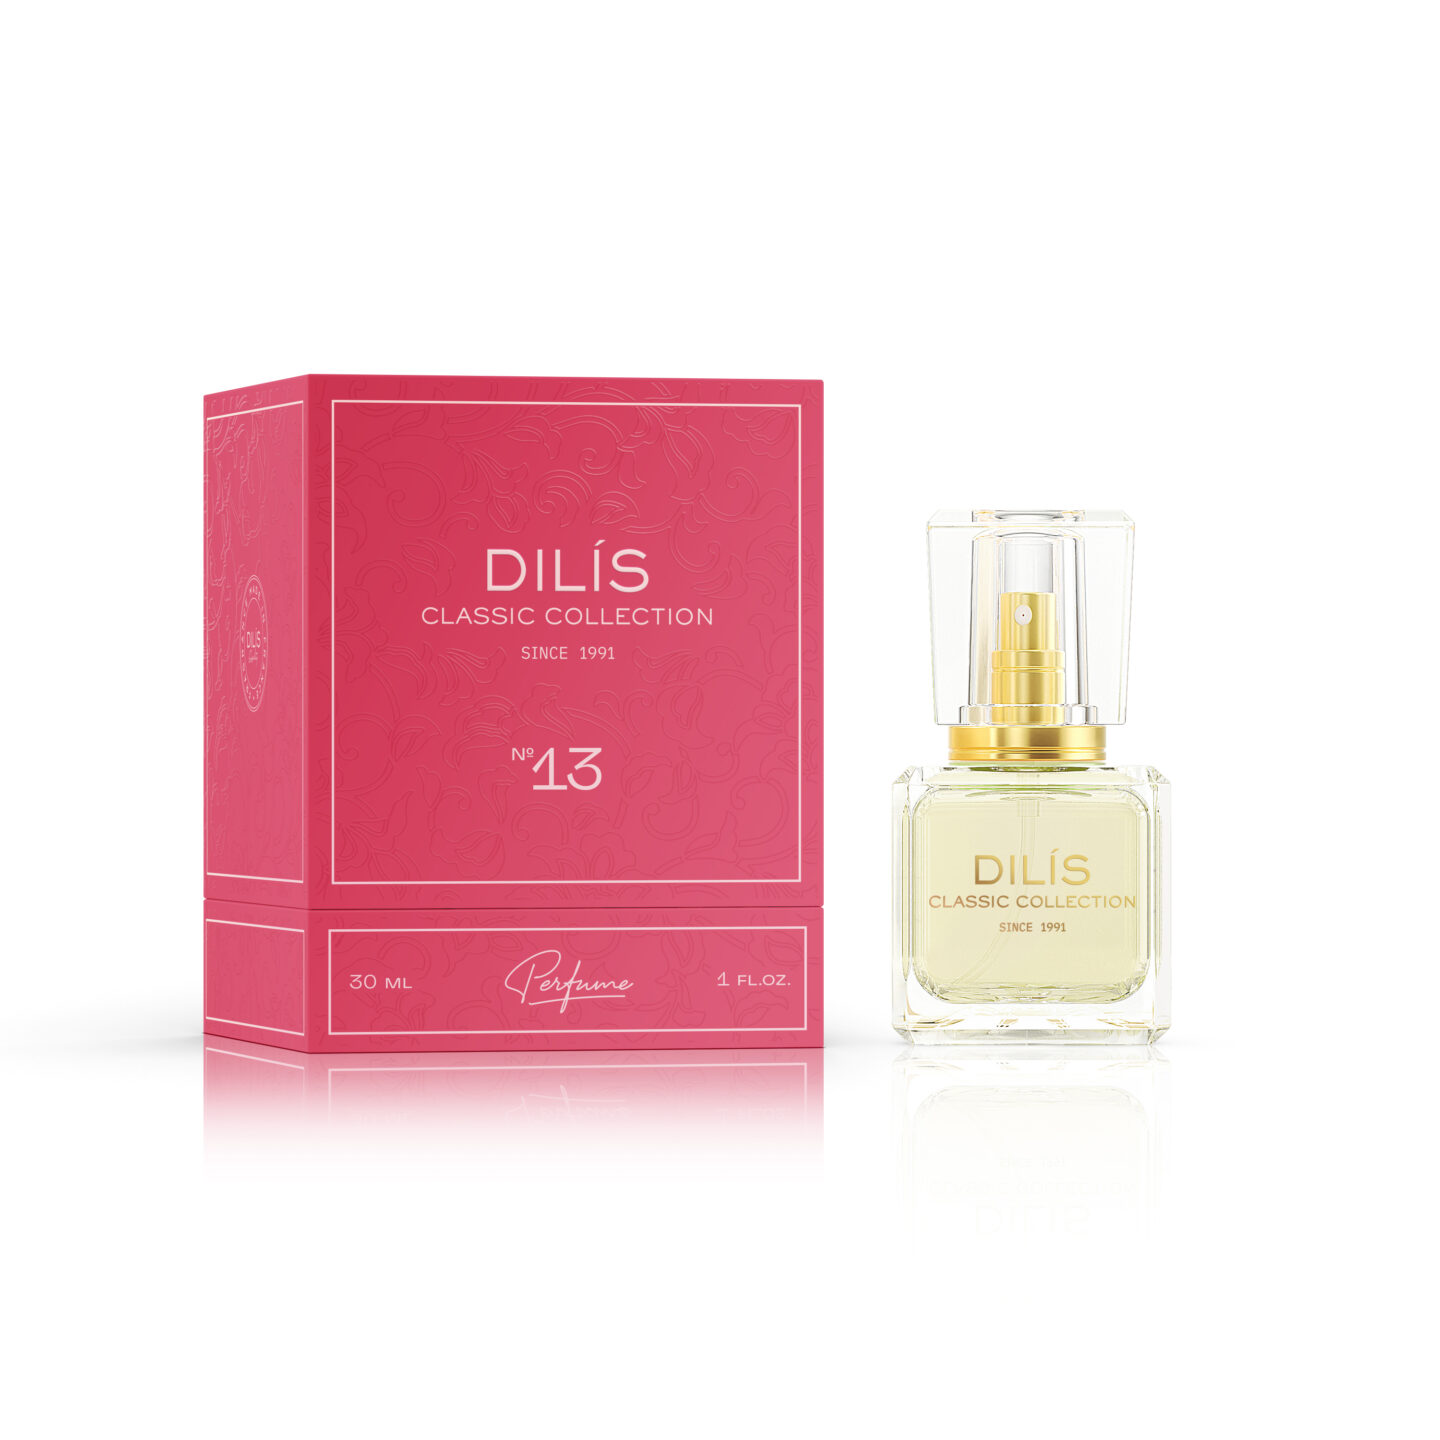 Духи Dilis Classic Collection №13 30мл духи dilis classic collection 13 30мл